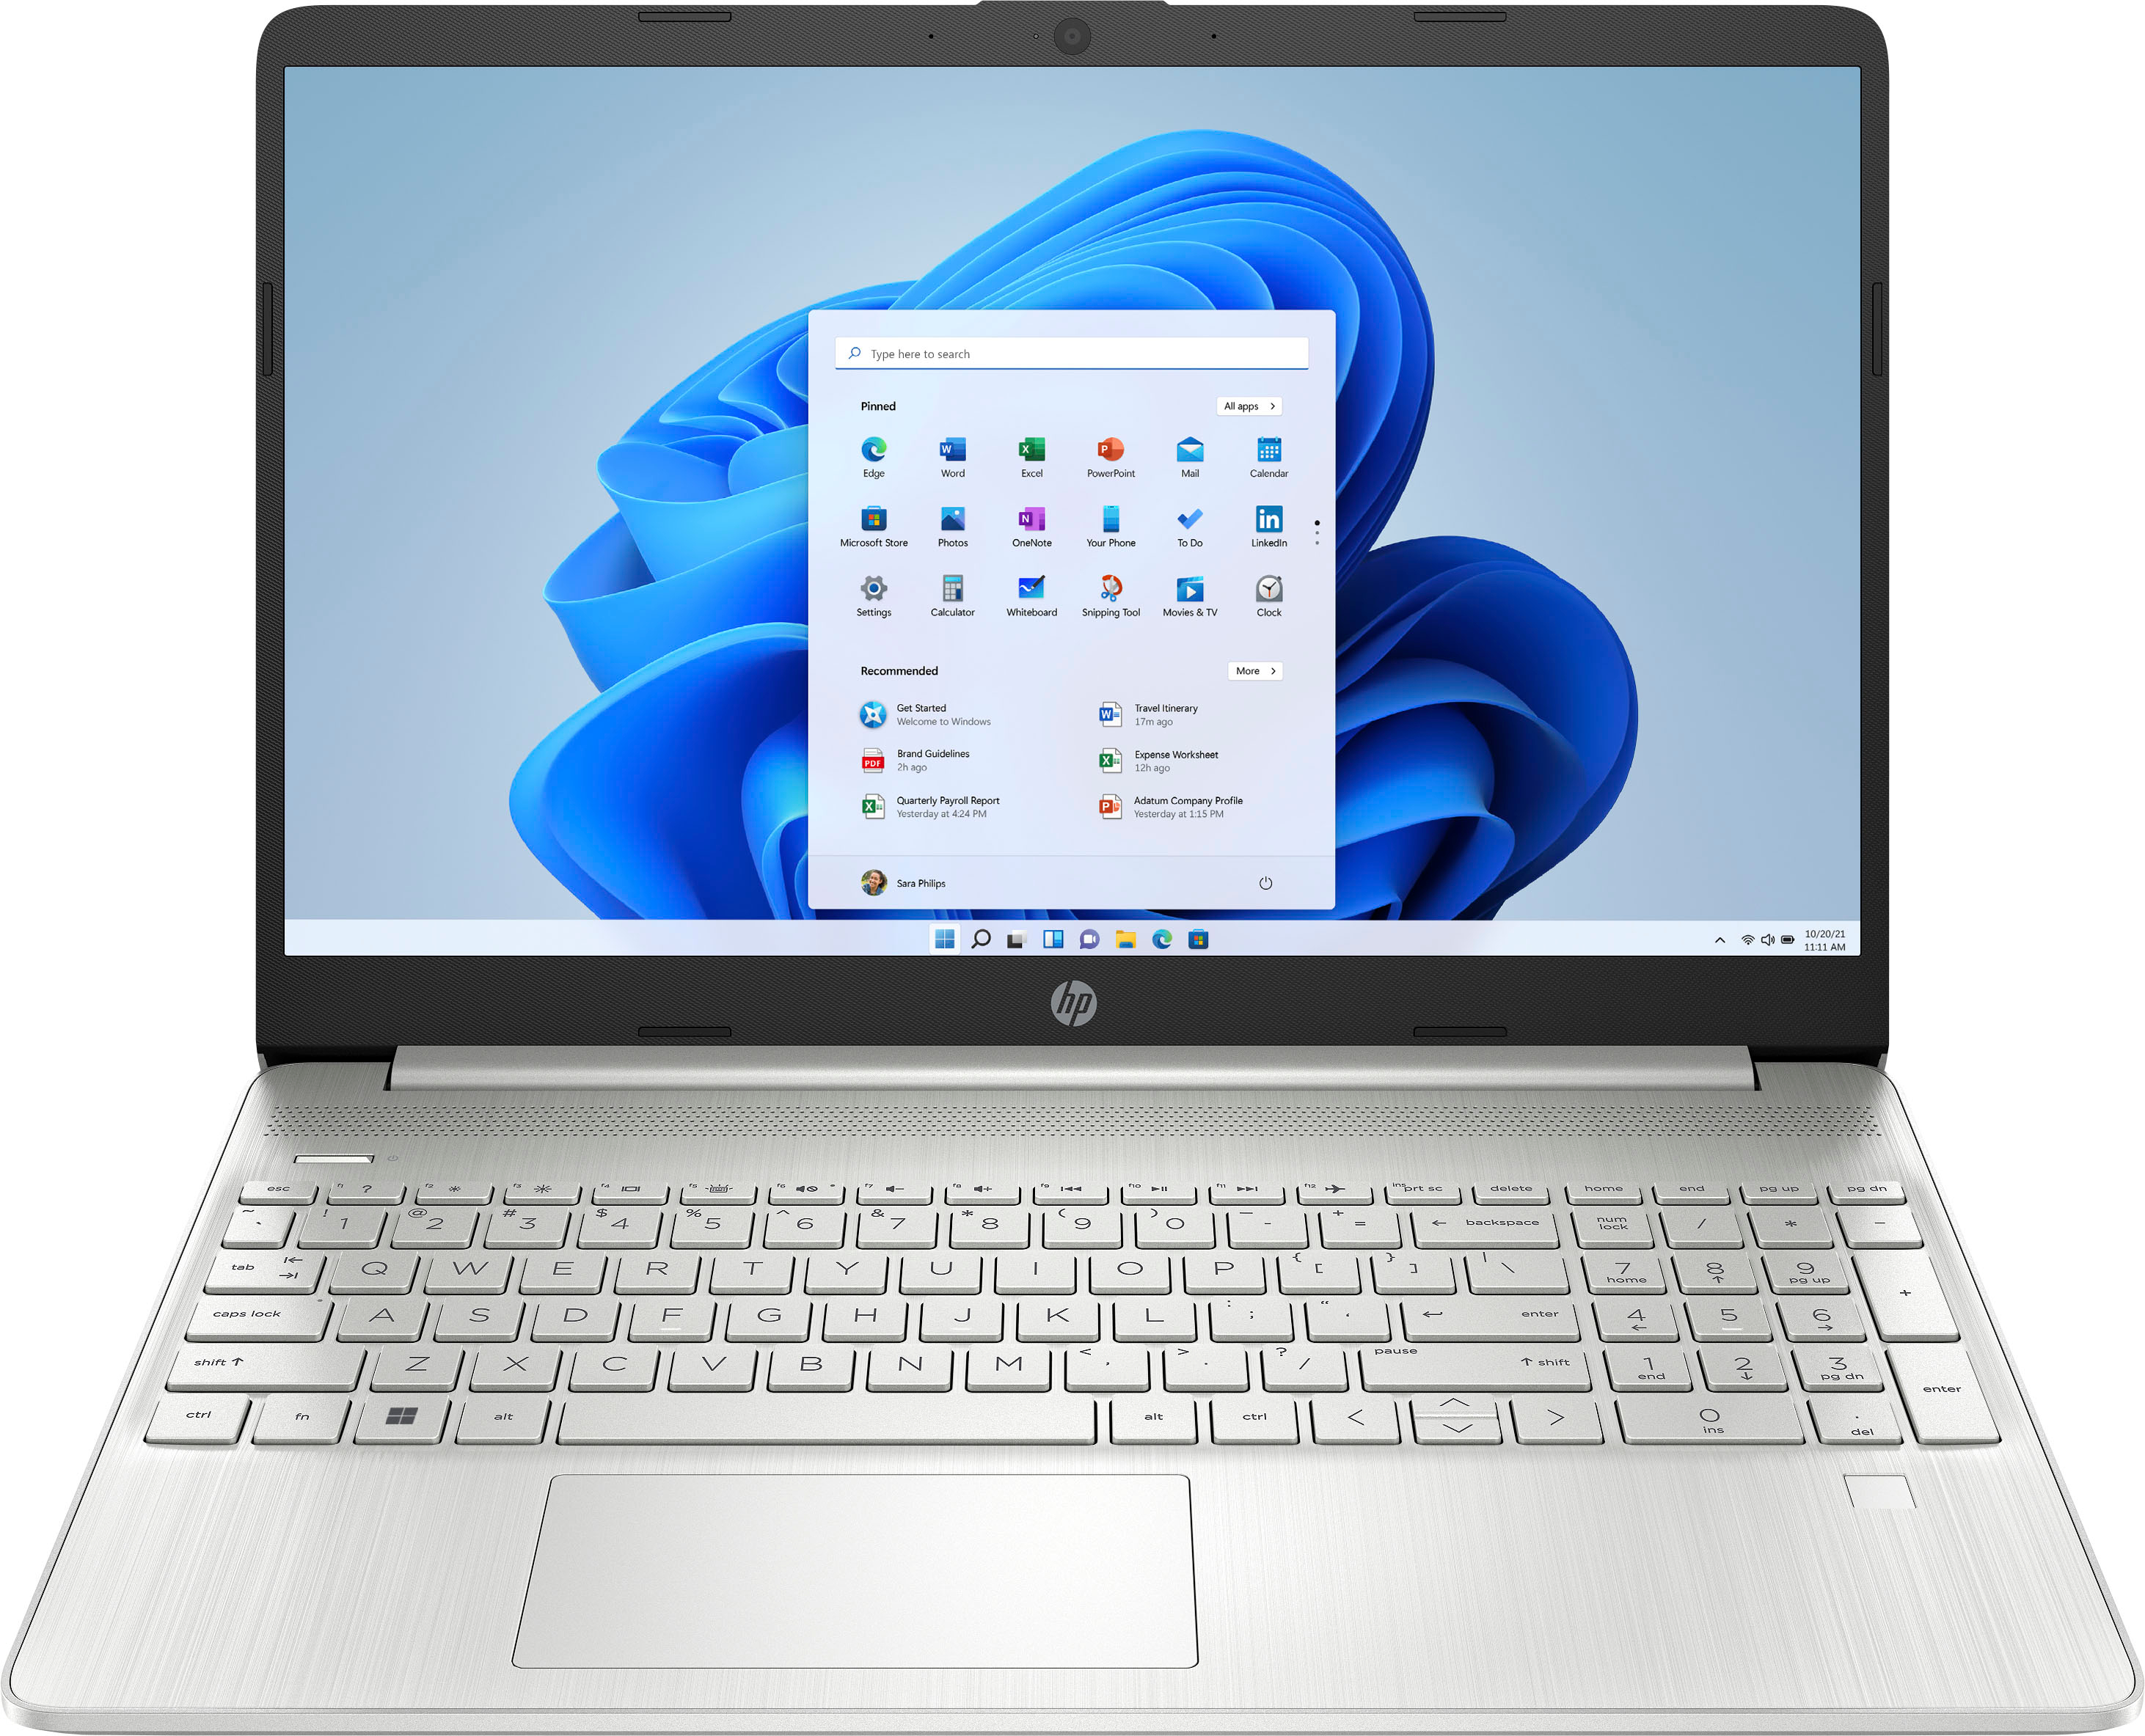 Toshiba Ultrabook to debut at Best Buy for $799 - CNET